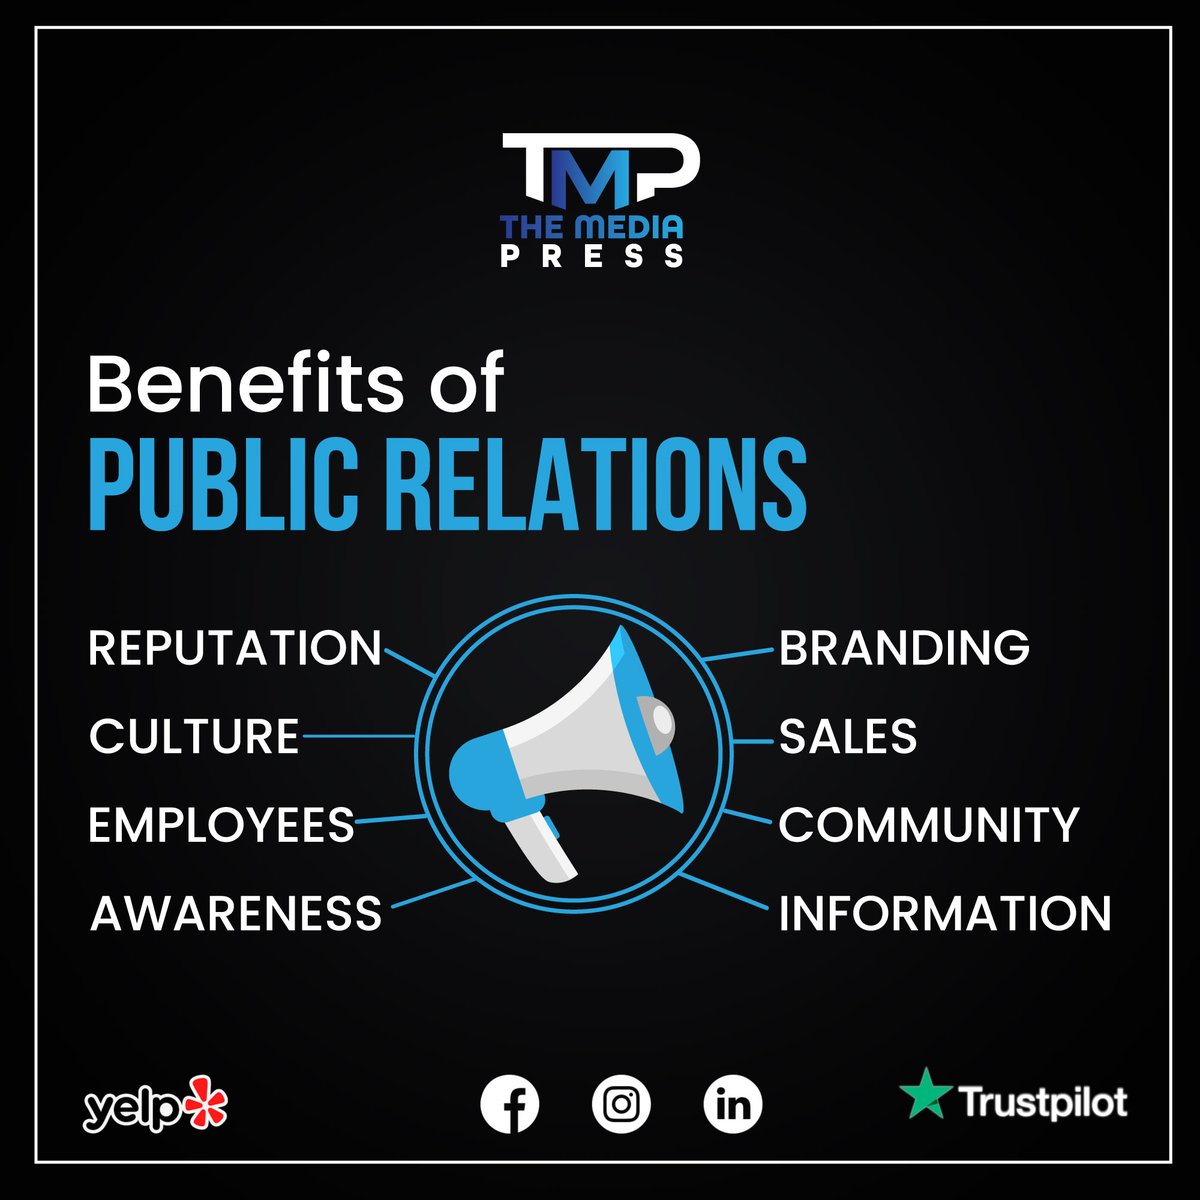 Public Relations amplifies brand reach, builds credibility, fosters positive image, and nurtures lasting relationships. Bridge between brands and audience.

#PRBenefits #BrandCredibility #MediaEngagement #TrustBuilding #CrisisManagement #BusinessGrowth #StrategicStorytelling